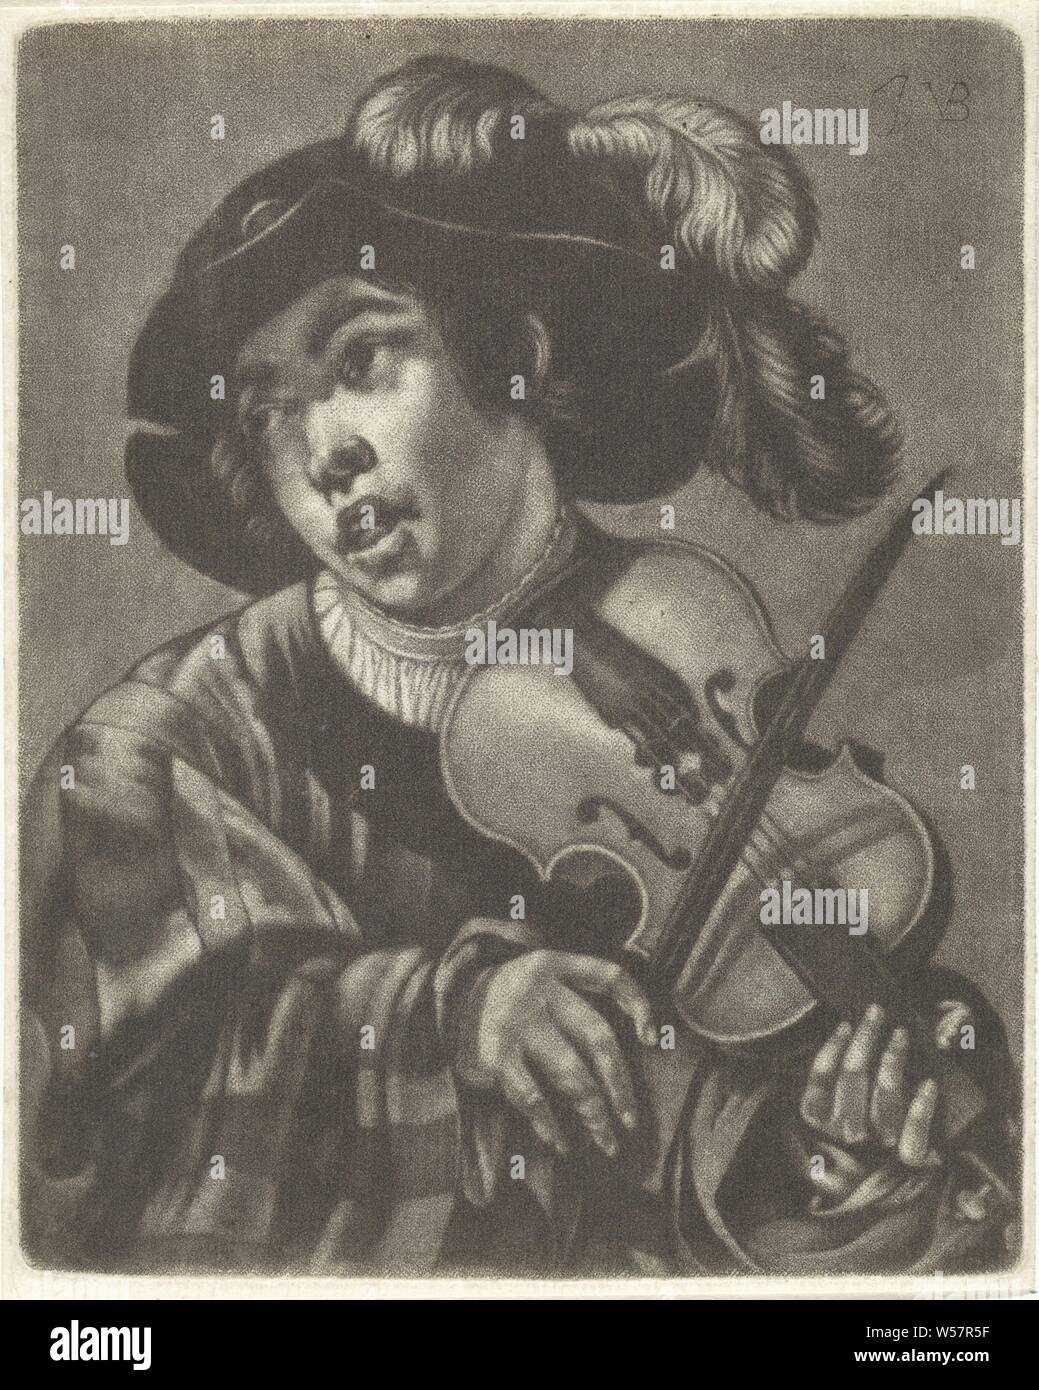 Violin player, A boy with a feathered hat on his head, playing a violin, violin, fiddle, one person playing string instrument (bowed), Jan van der Bruggen (attributed to), Amsterdam, 1681 - 1740, paper, h 127 mm × w 102 mm Stock Photo